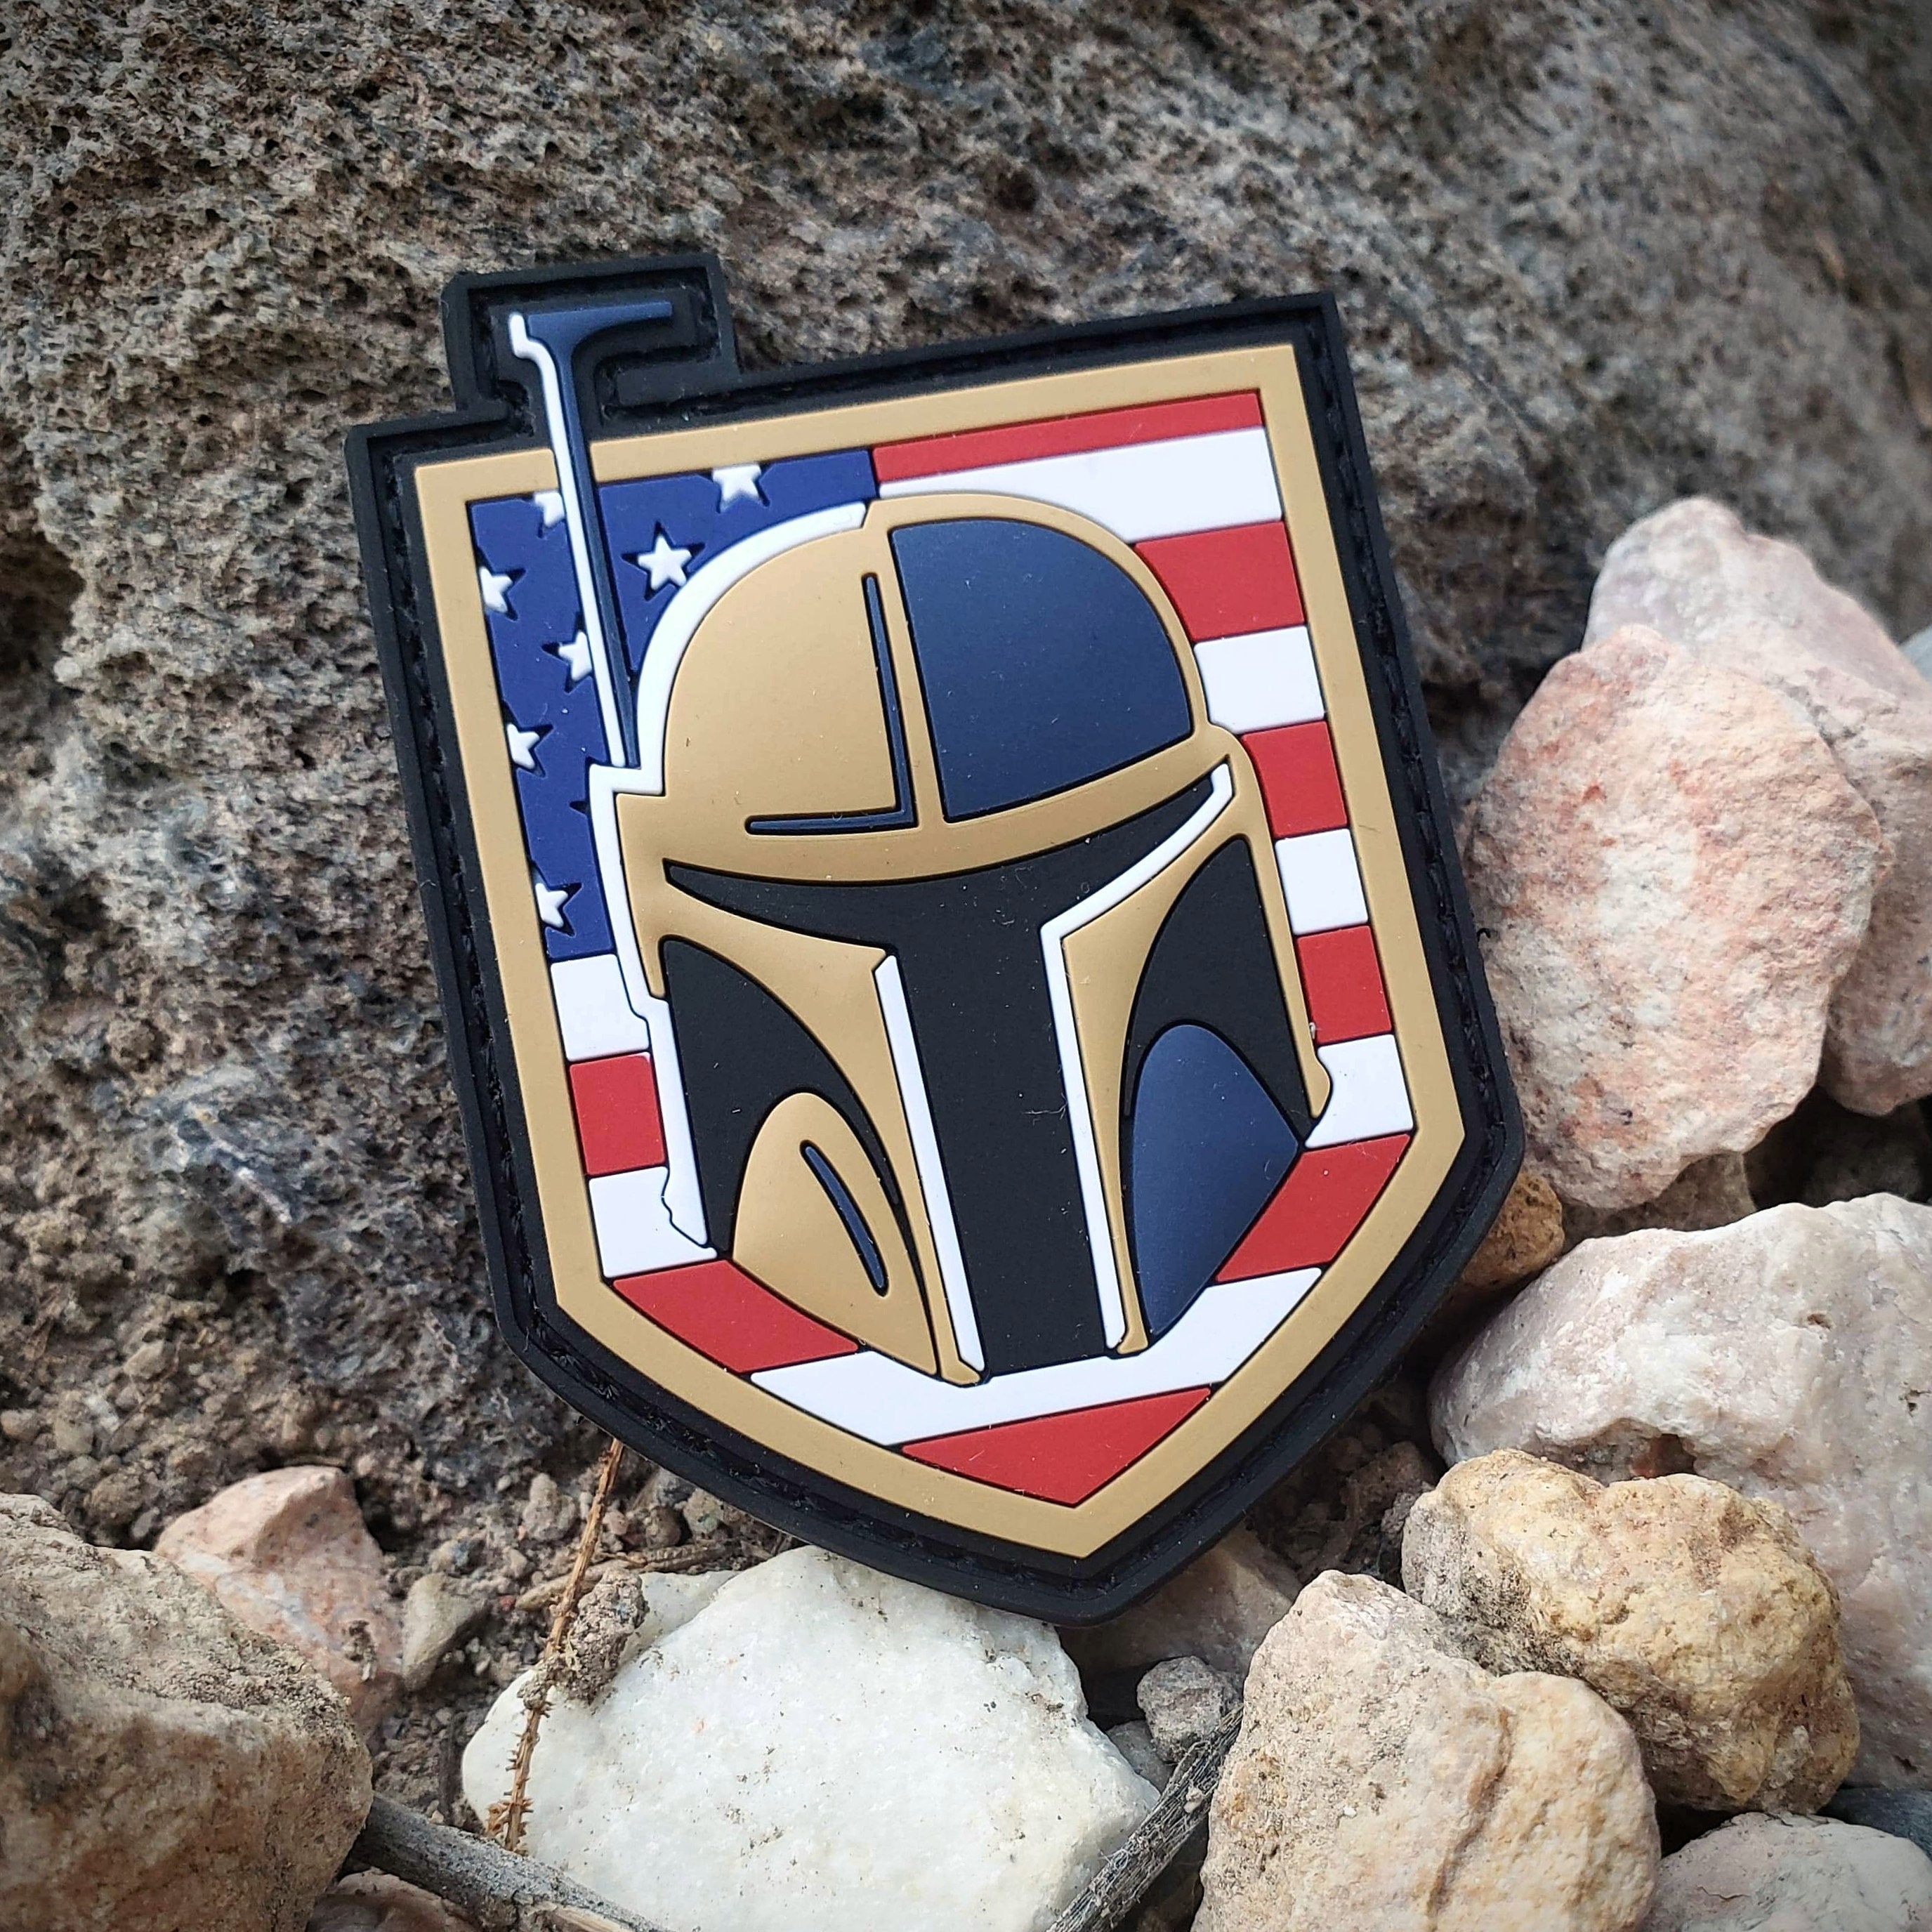  Star Wars Boba Fett Mandalorian Operator Morale Patch. Perfect  for Your Tactical Military Army Gear, Backpack, Operator Baseball Cap,  Plate Carrier or Vest. 2x3 Hook and Loop Patch. Made in The